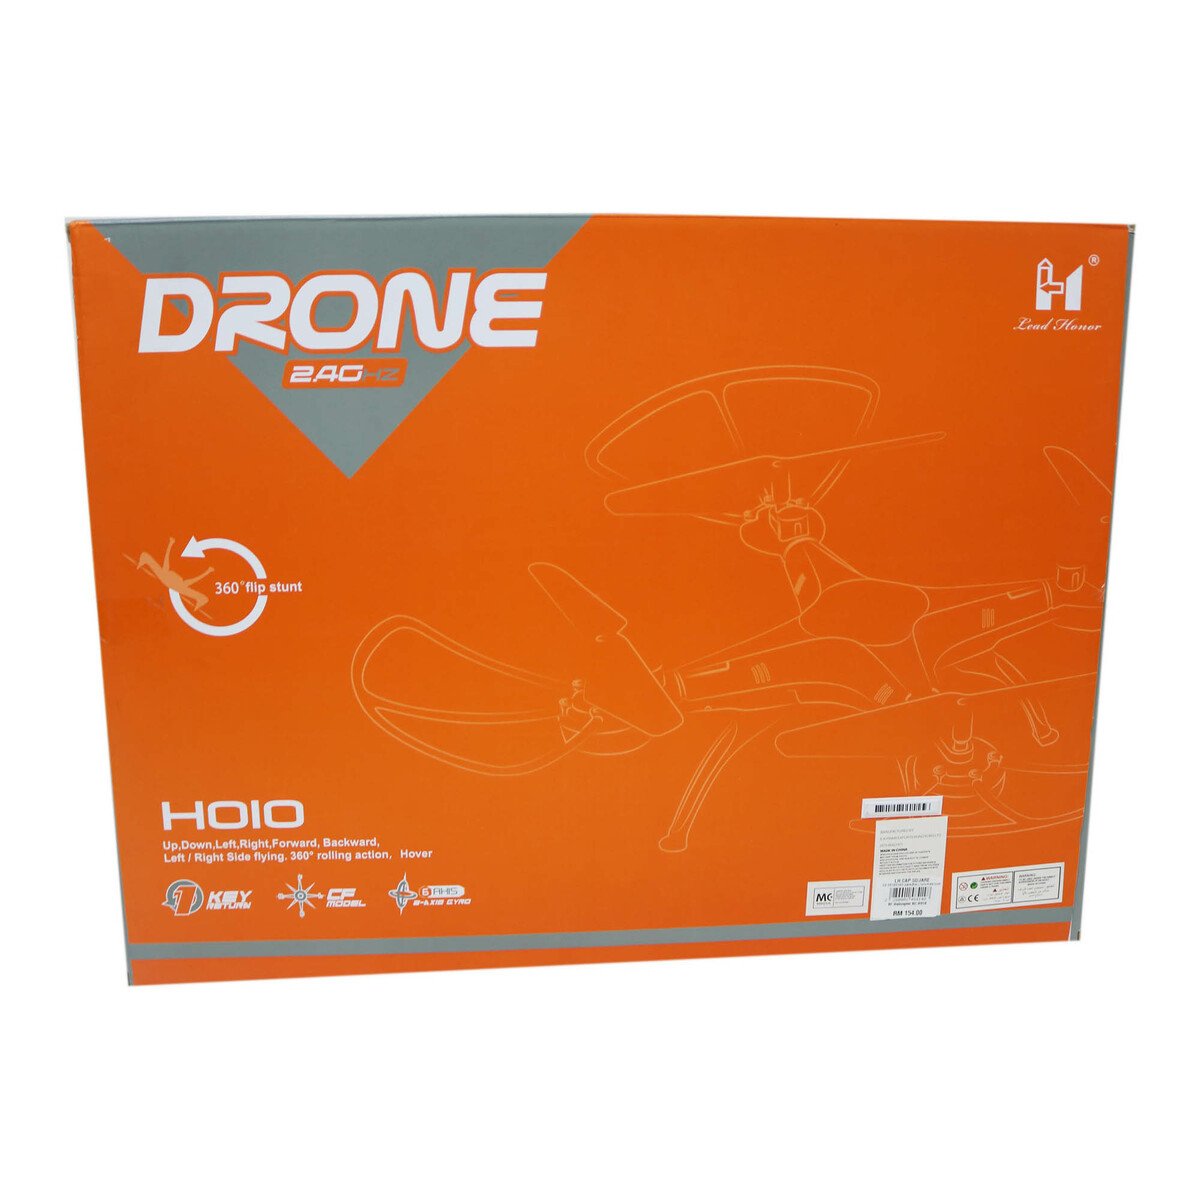 Skid Fusion Helicopter Remote Control H010